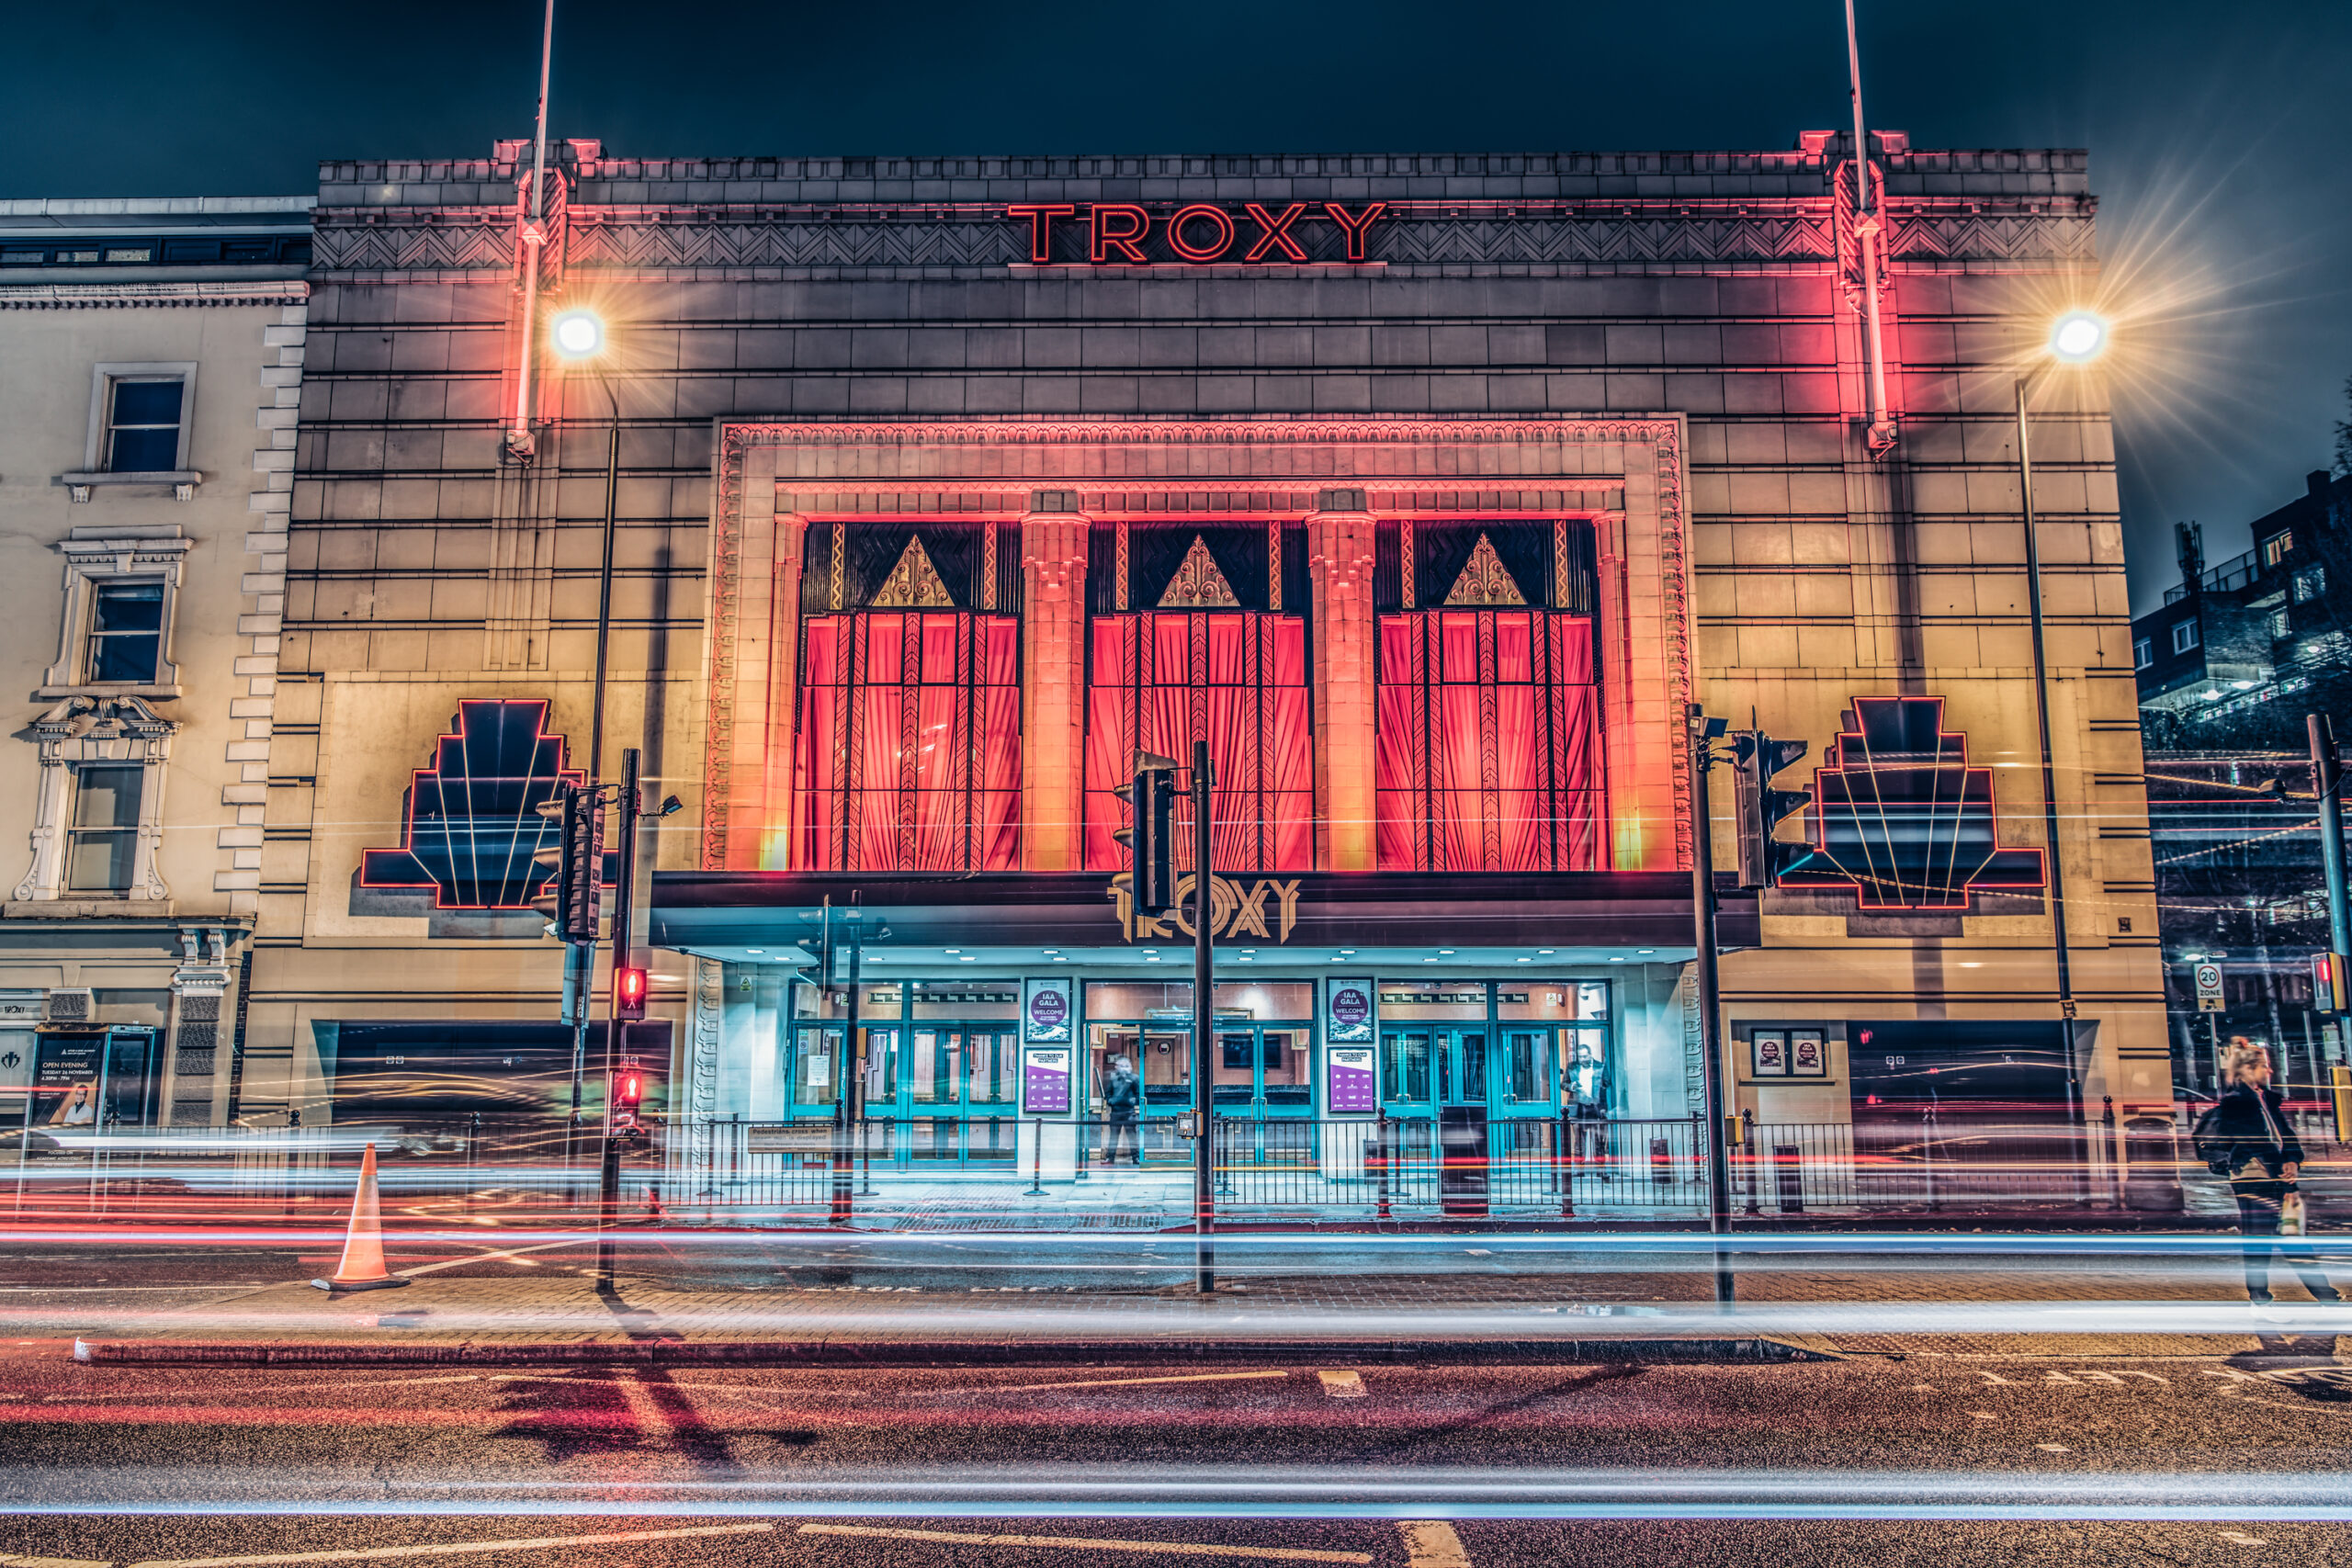 Troxy venue lit up at night, taken from the road with a slow exposure